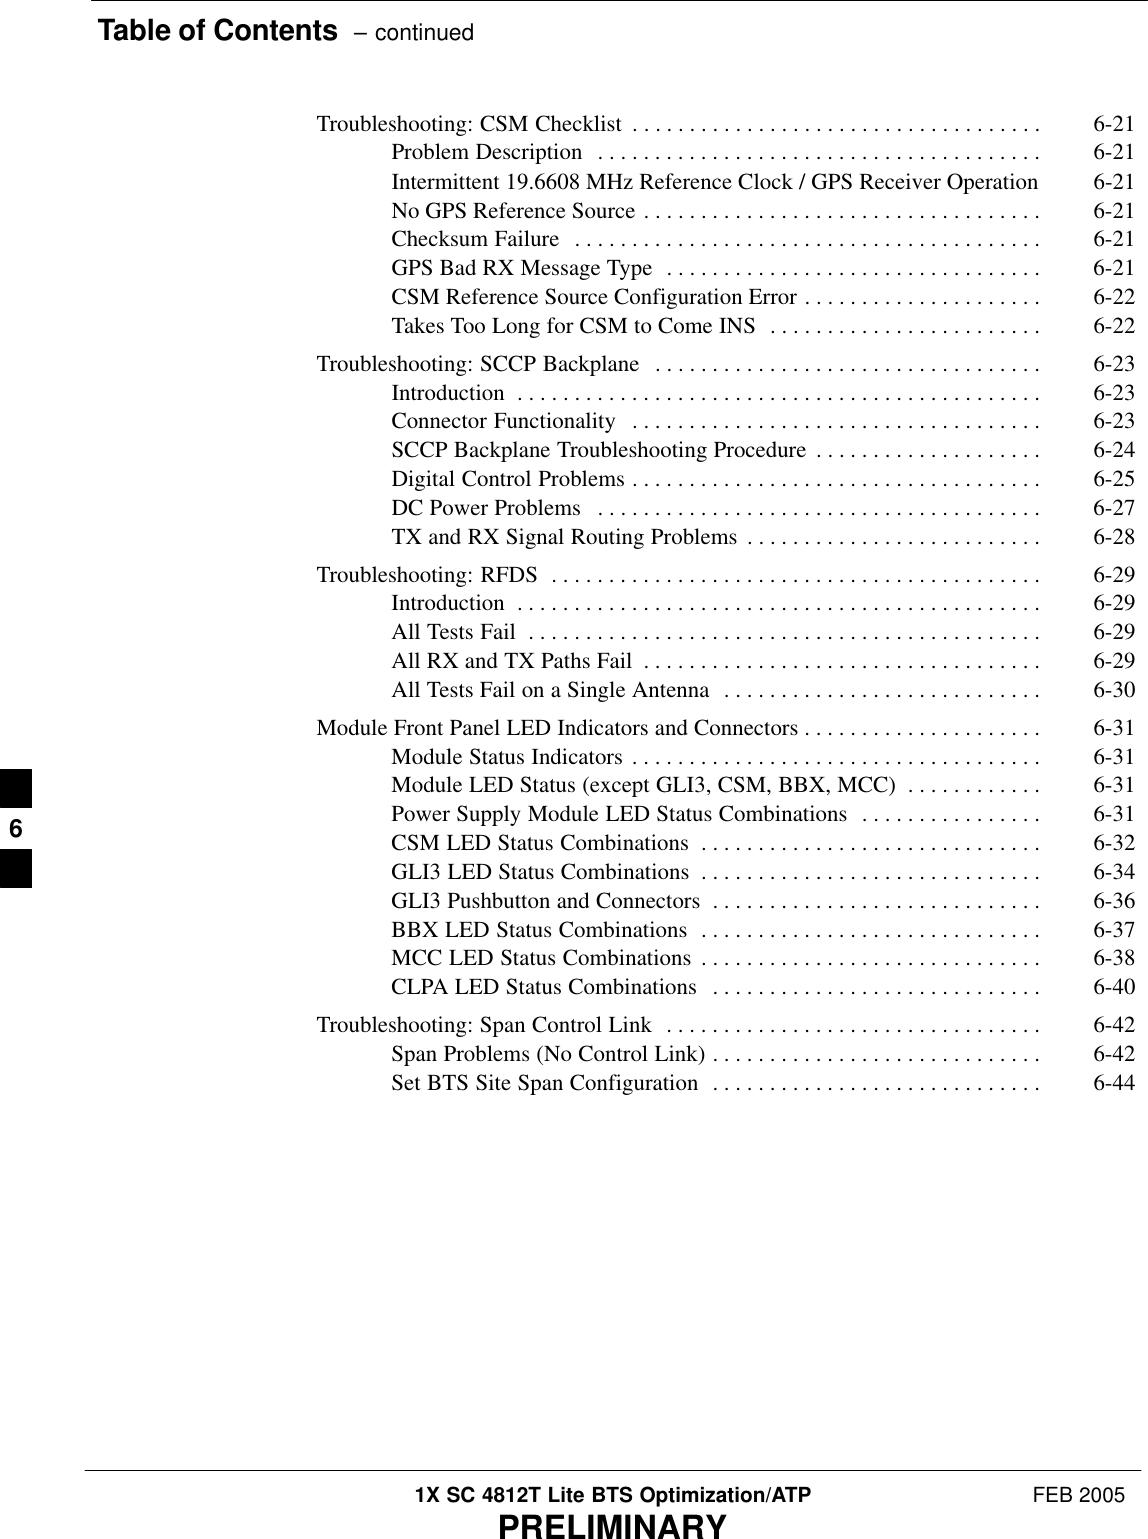 Table of Contents  – continued1X SC 4812T Lite BTS Optimization/ATP FEB 2005PRELIMINARYTroubleshooting: CSM Checklist 6-21 . . . . . . . . . . . . . . . . . . . . . . . . . . . . . . . . . . . . Problem Description 6-21 . . . . . . . . . . . . . . . . . . . . . . . . . . . . . . . . . . . . . . . Intermittent 19.6608 MHz Reference Clock / GPS Receiver Operation 6-21 No GPS Reference Source 6-21 . . . . . . . . . . . . . . . . . . . . . . . . . . . . . . . . . . . Checksum Failure 6-21 . . . . . . . . . . . . . . . . . . . . . . . . . . . . . . . . . . . . . . . . . GPS Bad RX Message Type 6-21 . . . . . . . . . . . . . . . . . . . . . . . . . . . . . . . . . CSM Reference Source Configuration Error 6-22 . . . . . . . . . . . . . . . . . . . . . Takes Too Long for CSM to Come INS 6-22 . . . . . . . . . . . . . . . . . . . . . . . . Troubleshooting: SCCP Backplane 6-23 . . . . . . . . . . . . . . . . . . . . . . . . . . . . . . . . . . Introduction 6-23 . . . . . . . . . . . . . . . . . . . . . . . . . . . . . . . . . . . . . . . . . . . . . . Connector Functionality 6-23 . . . . . . . . . . . . . . . . . . . . . . . . . . . . . . . . . . . . SCCP Backplane Troubleshooting Procedure 6-24 . . . . . . . . . . . . . . . . . . . . Digital Control Problems 6-25 . . . . . . . . . . . . . . . . . . . . . . . . . . . . . . . . . . . . DC Power Problems 6-27 . . . . . . . . . . . . . . . . . . . . . . . . . . . . . . . . . . . . . . . TX and RX Signal Routing Problems 6-28 . . . . . . . . . . . . . . . . . . . . . . . . . . Troubleshooting: RFDS 6-29 . . . . . . . . . . . . . . . . . . . . . . . . . . . . . . . . . . . . . . . . . . . Introduction 6-29 . . . . . . . . . . . . . . . . . . . . . . . . . . . . . . . . . . . . . . . . . . . . . . All Tests Fail 6-29 . . . . . . . . . . . . . . . . . . . . . . . . . . . . . . . . . . . . . . . . . . . . . All RX and TX Paths Fail 6-29 . . . . . . . . . . . . . . . . . . . . . . . . . . . . . . . . . . . All Tests Fail on a Single Antenna 6-30 . . . . . . . . . . . . . . . . . . . . . . . . . . . . Module Front Panel LED Indicators and Connectors 6-31 . . . . . . . . . . . . . . . . . . . . . Module Status Indicators 6-31 . . . . . . . . . . . . . . . . . . . . . . . . . . . . . . . . . . . . Module LED Status (except GLI3, CSM, BBX, MCC) 6-31 . . . . . . . . . . . . Power Supply Module LED Status Combinations 6-31 . . . . . . . . . . . . . . . . CSM LED Status Combinations 6-32 . . . . . . . . . . . . . . . . . . . . . . . . . . . . . . GLI3 LED Status Combinations 6-34 . . . . . . . . . . . . . . . . . . . . . . . . . . . . . . GLI3 Pushbutton and Connectors 6-36 . . . . . . . . . . . . . . . . . . . . . . . . . . . . . BBX LED Status Combinations 6-37 . . . . . . . . . . . . . . . . . . . . . . . . . . . . . . MCC LED Status Combinations 6-38 . . . . . . . . . . . . . . . . . . . . . . . . . . . . . . CLPA LED Status Combinations 6-40 . . . . . . . . . . . . . . . . . . . . . . . . . . . . . Troubleshooting: Span Control Link 6-42 . . . . . . . . . . . . . . . . . . . . . . . . . . . . . . . . . Span Problems (No Control Link) 6-42 . . . . . . . . . . . . . . . . . . . . . . . . . . . . . Set BTS Site Span Configuration 6-44 . . . . . . . . . . . . . . . . . . . . . . . . . . . . . 6